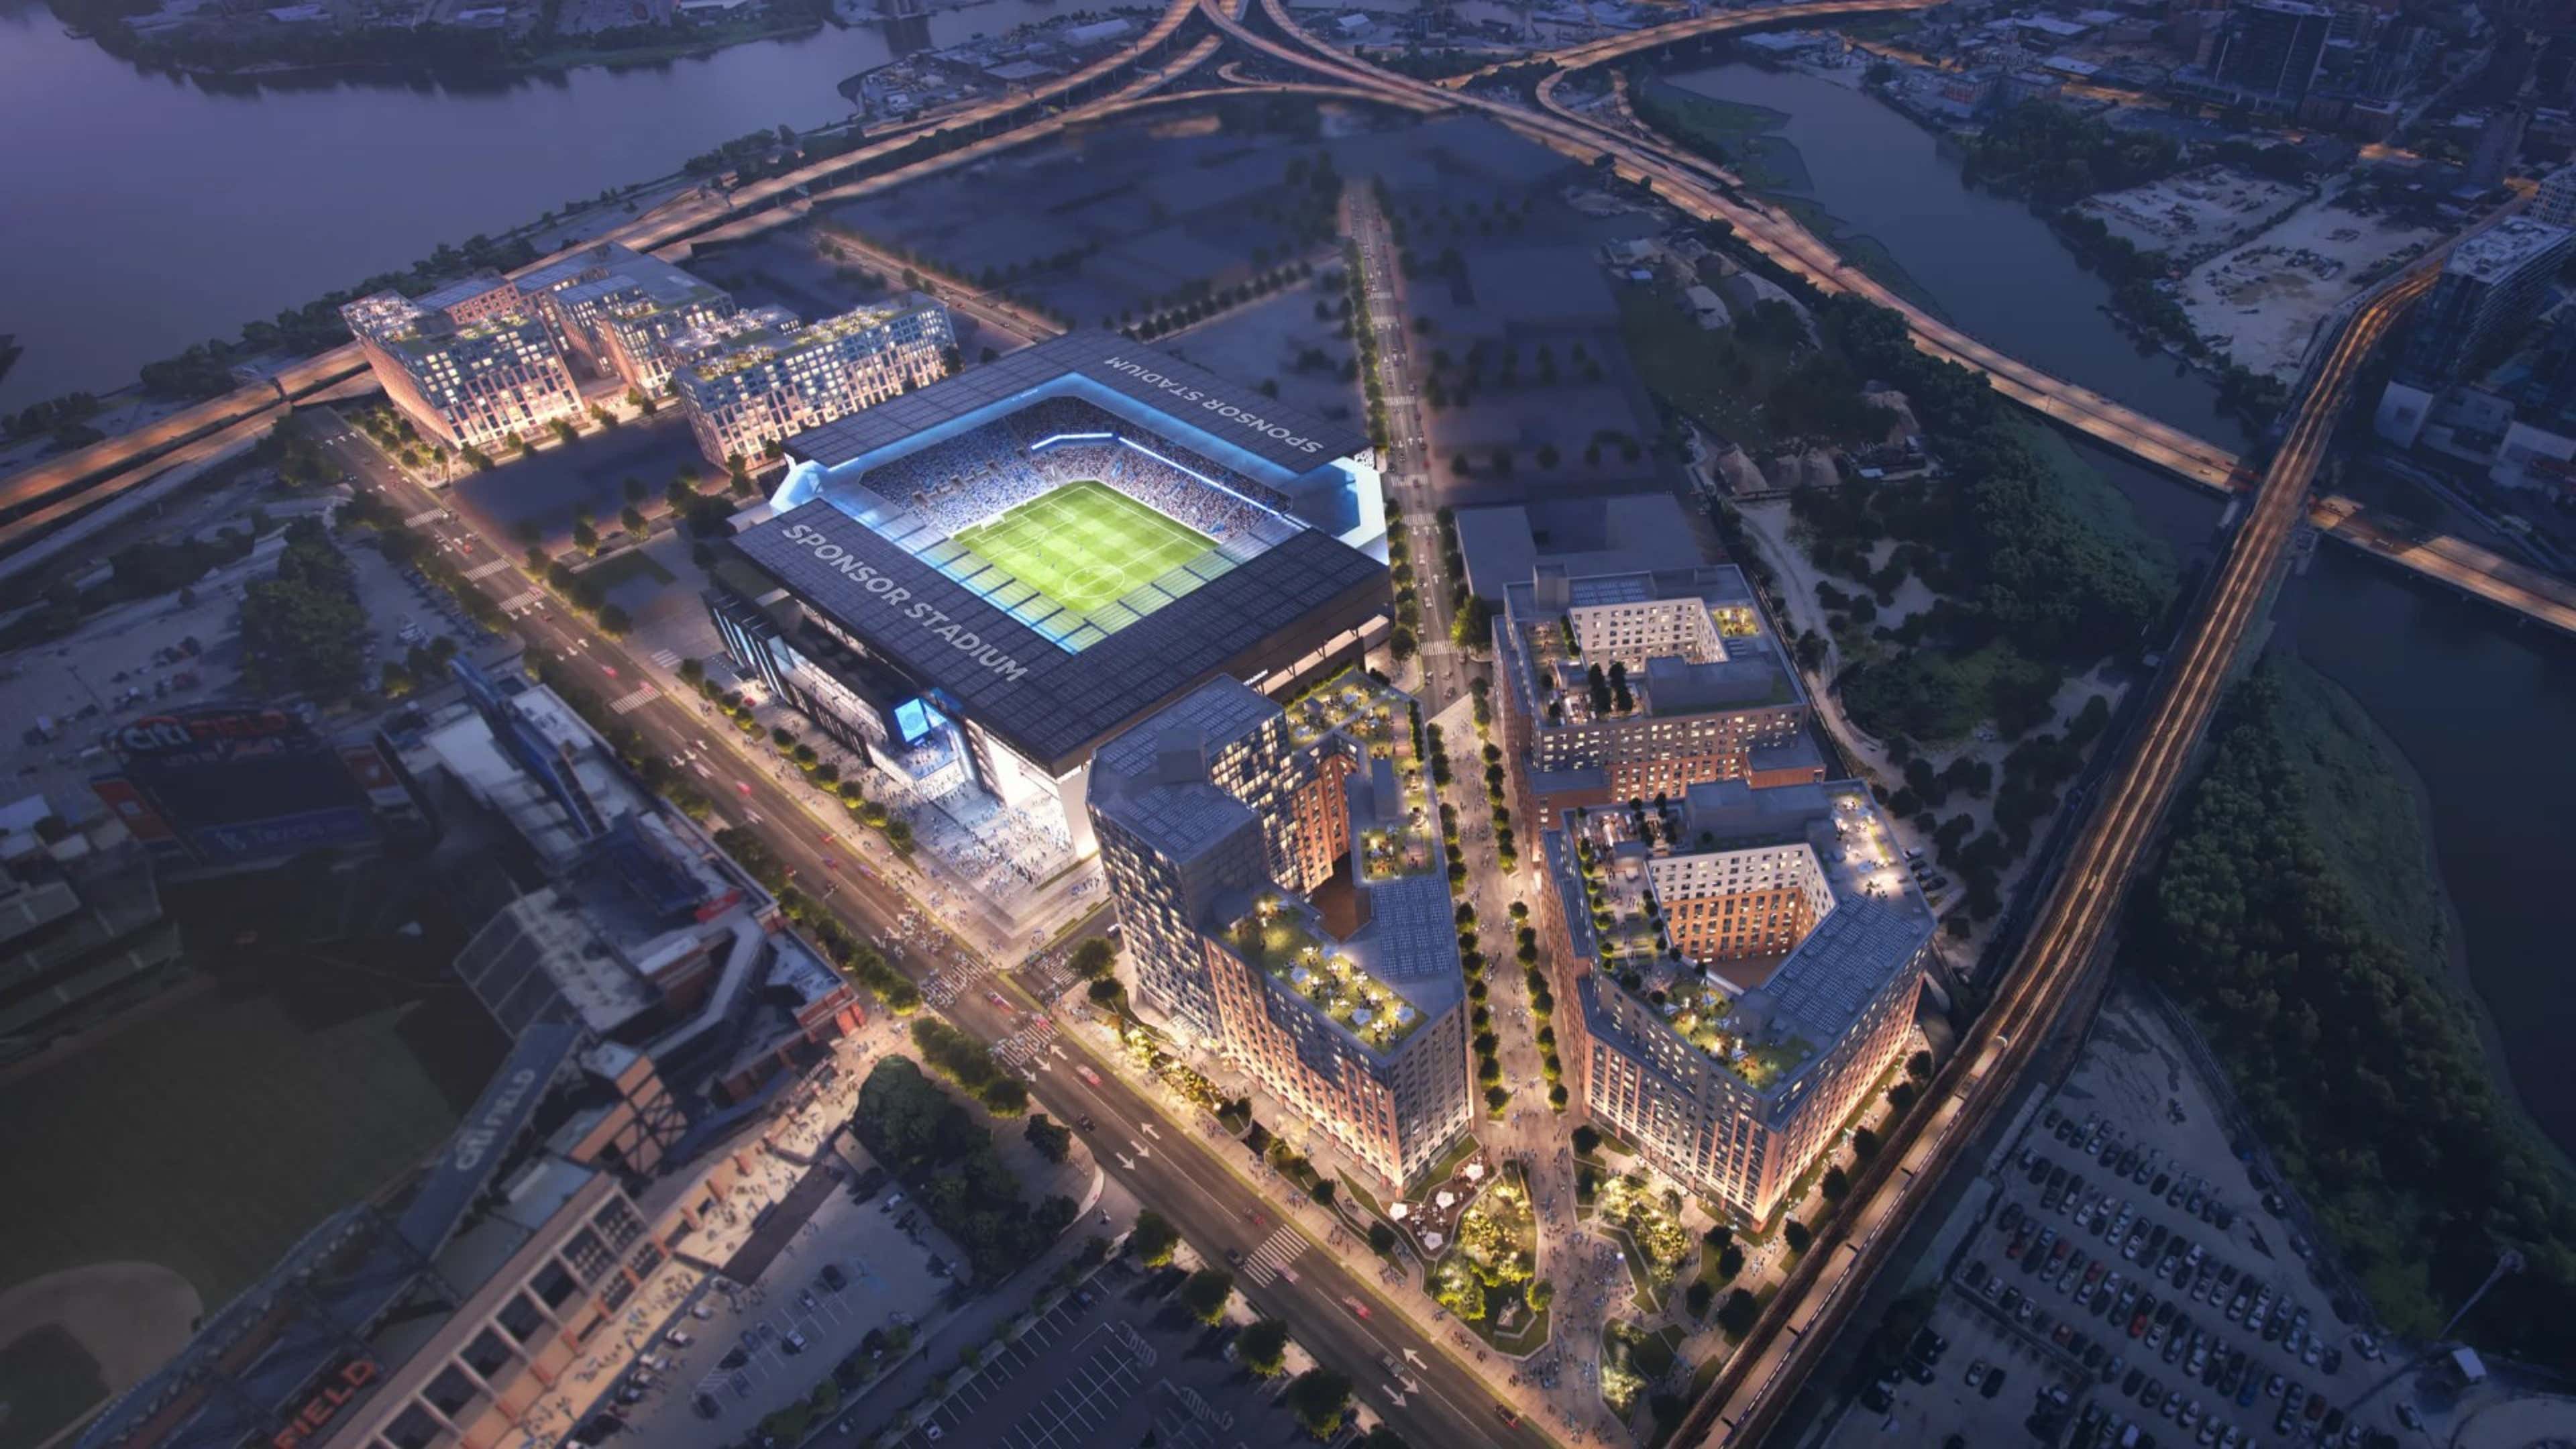 New York's new $780 million soccer stadium renderings look beautiful - with  NYCFC wanting to open privately financed venue by 2027